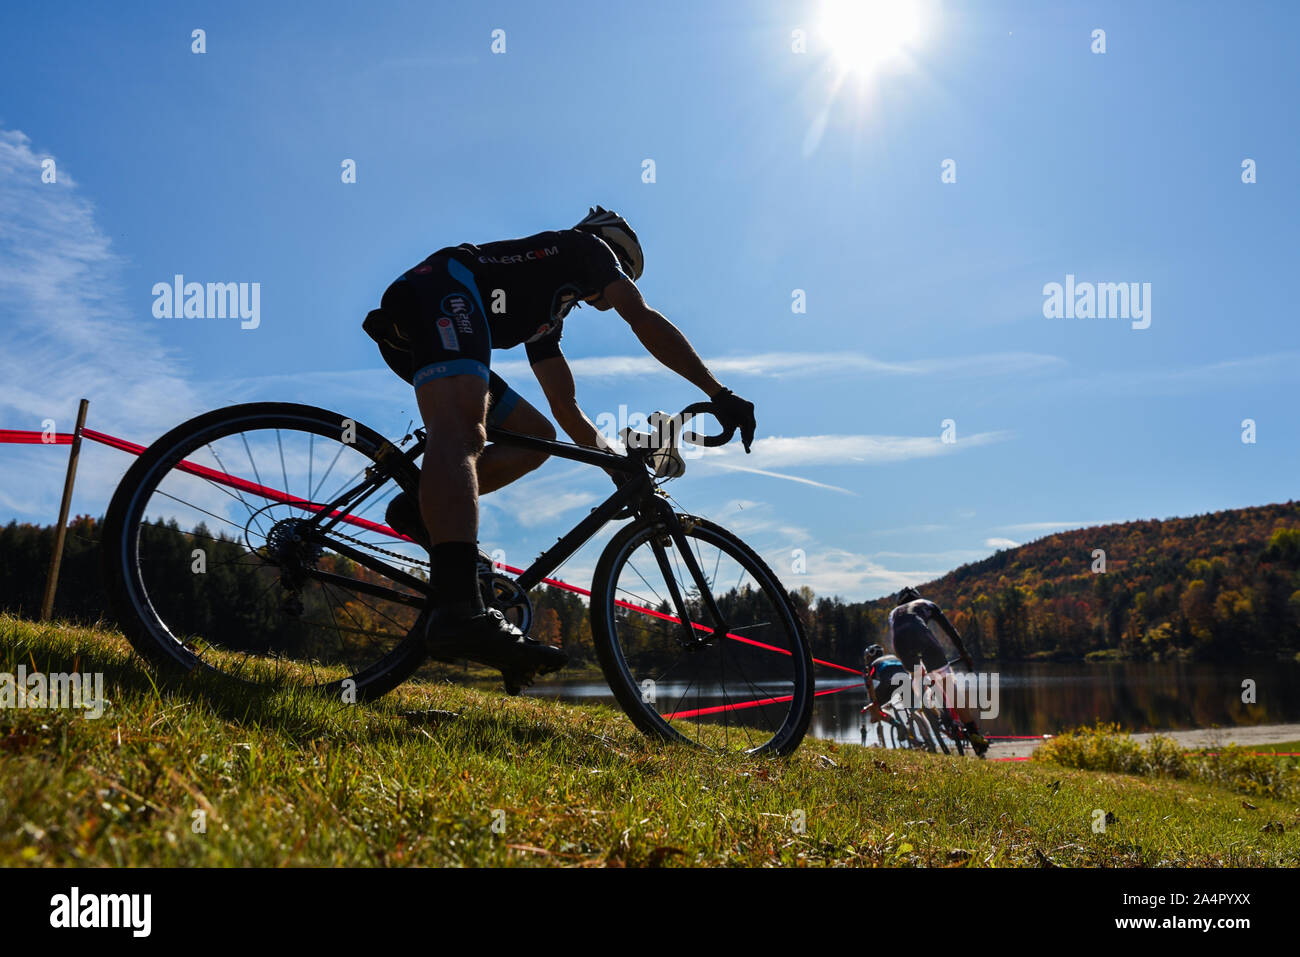 Cyclists compete in cyclo-cross racing, Dam Wrightsville Cyclo-Cross, Middlesex, VT, USA. Stock Photo